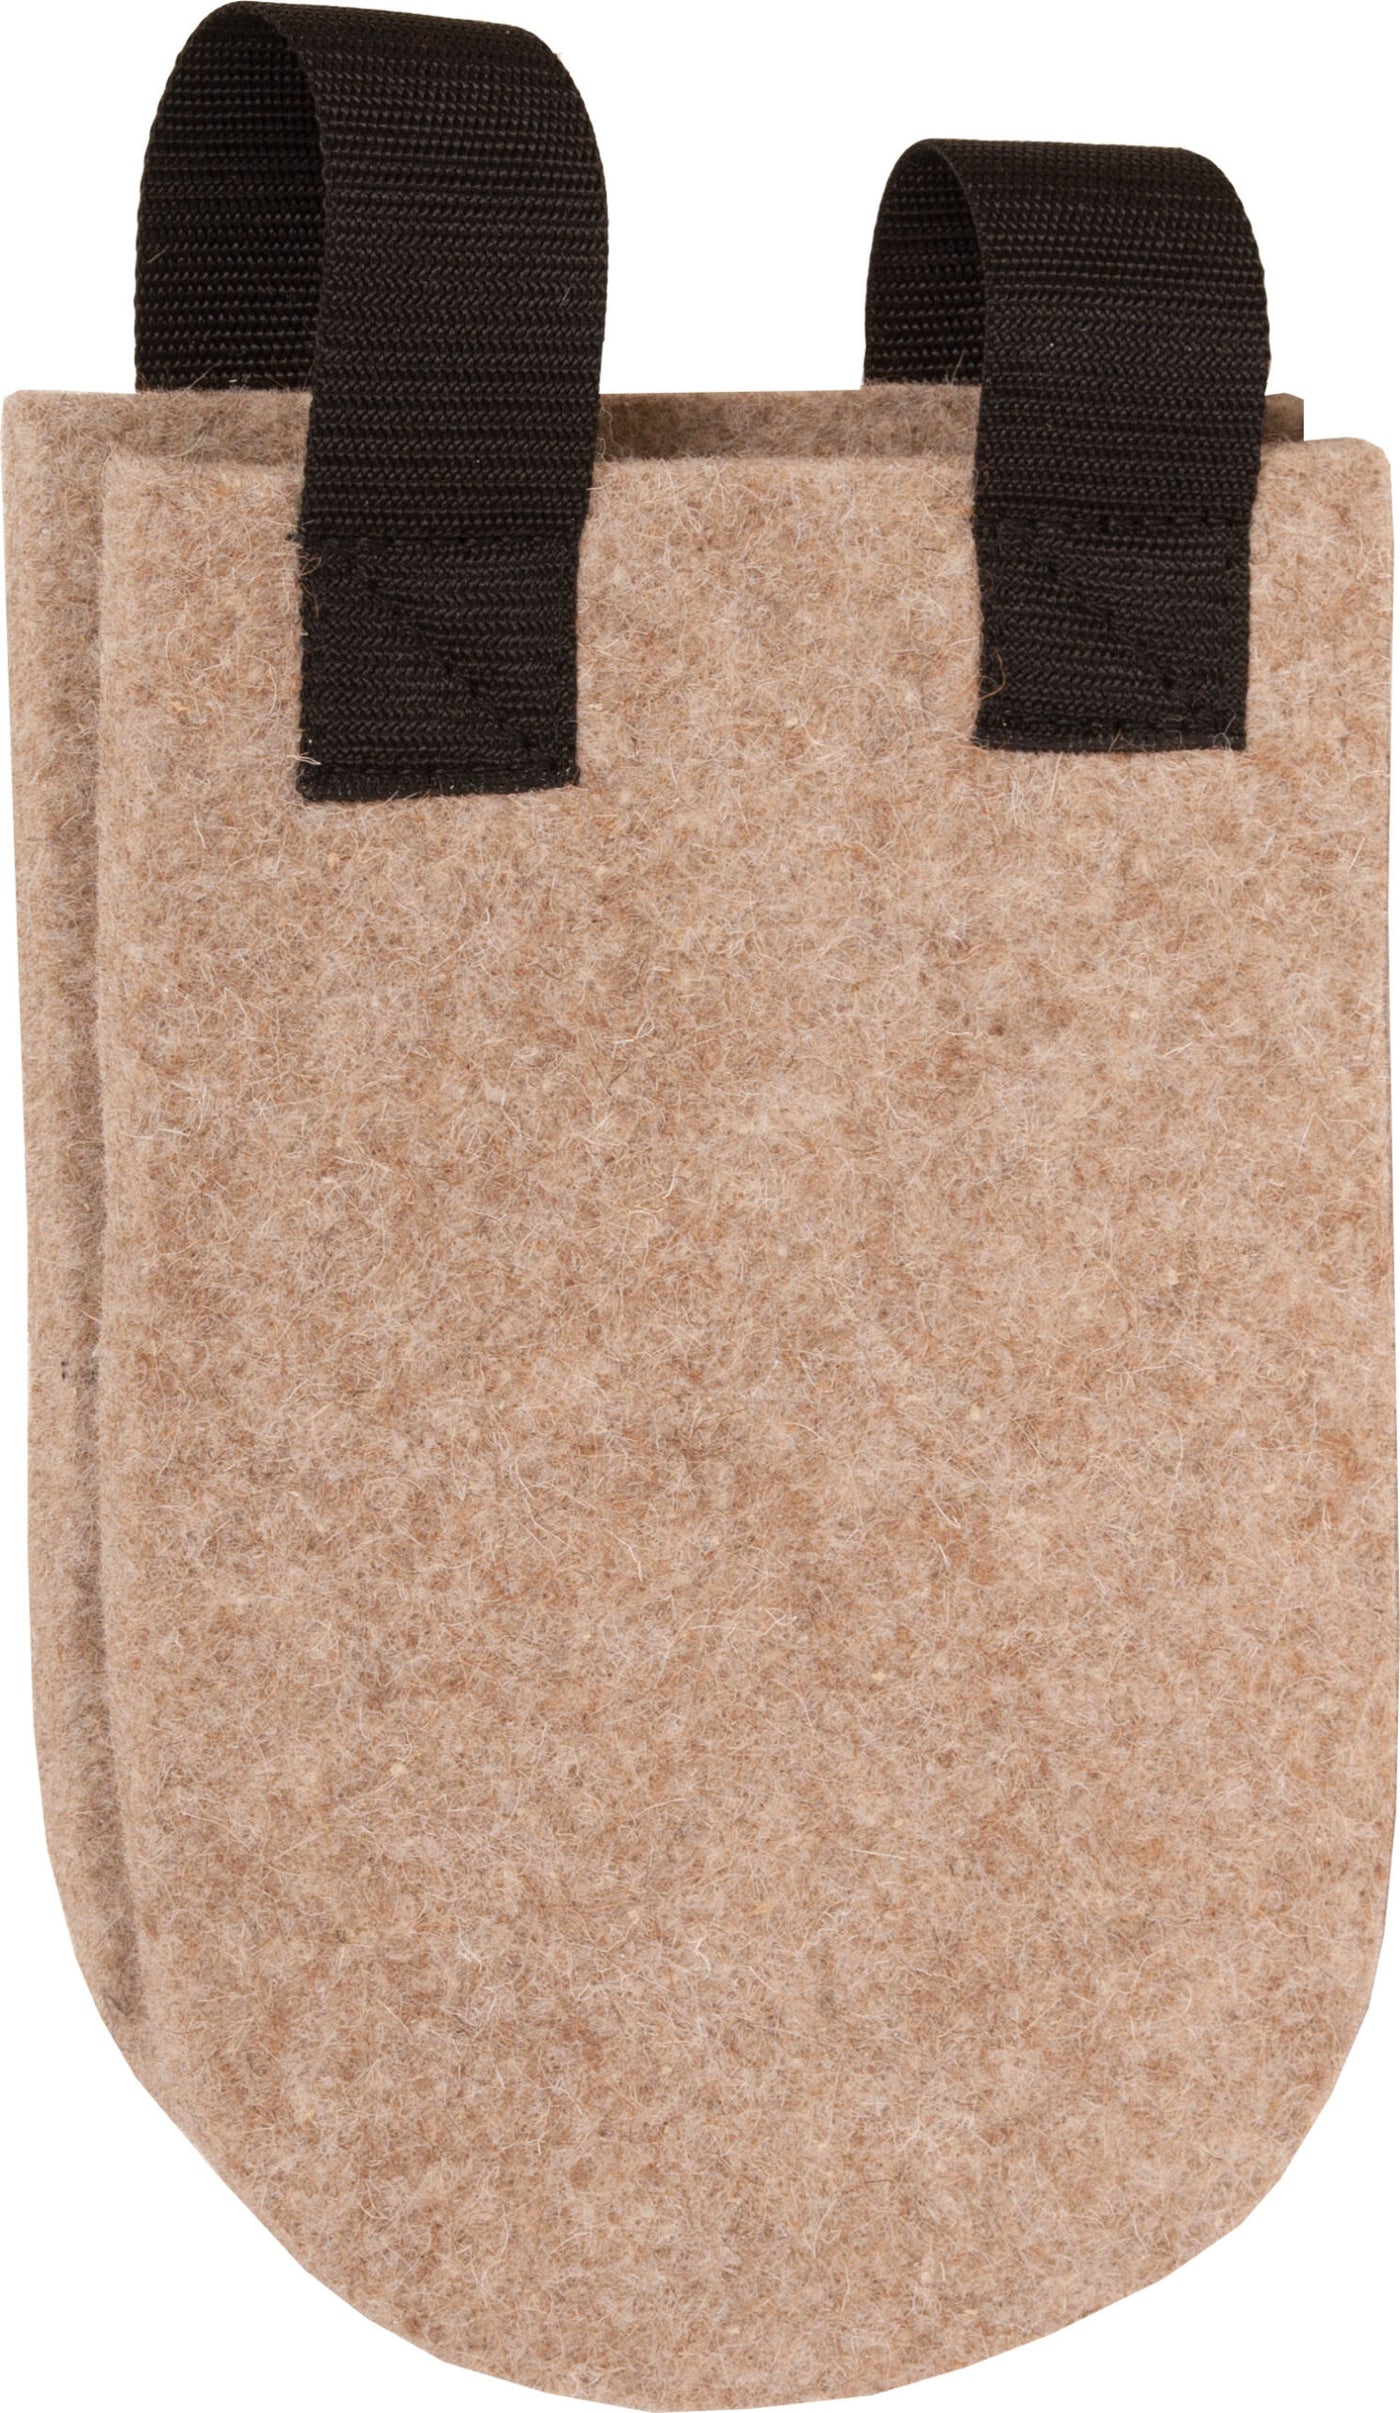 Mustang Tan Wool Wither Pad